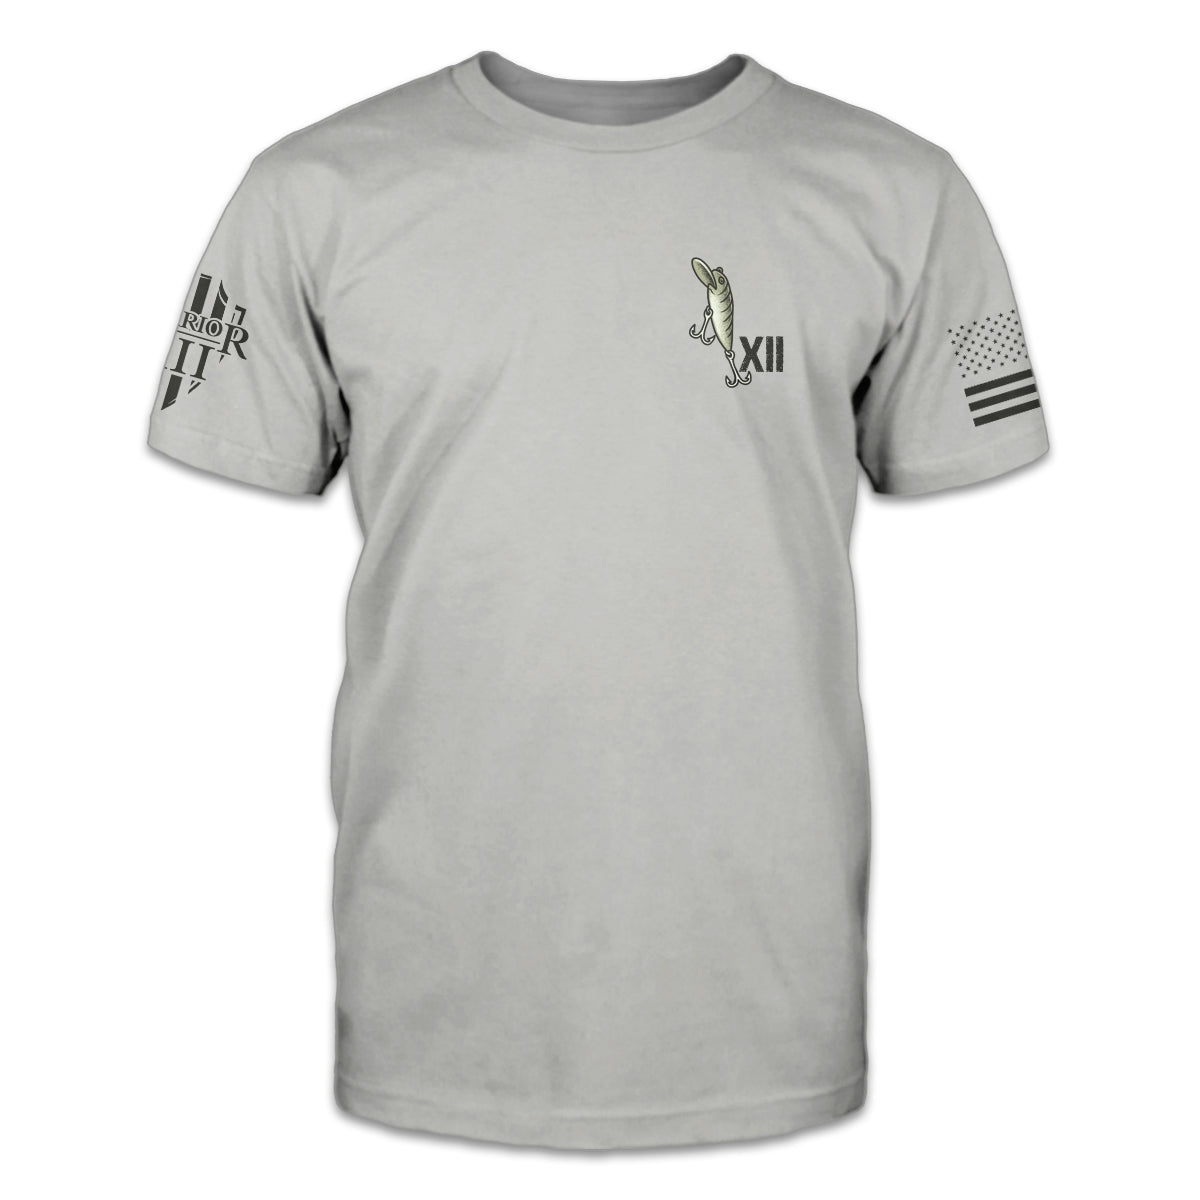 The front of a light grey shirt featuring a small pocket image of a lure.